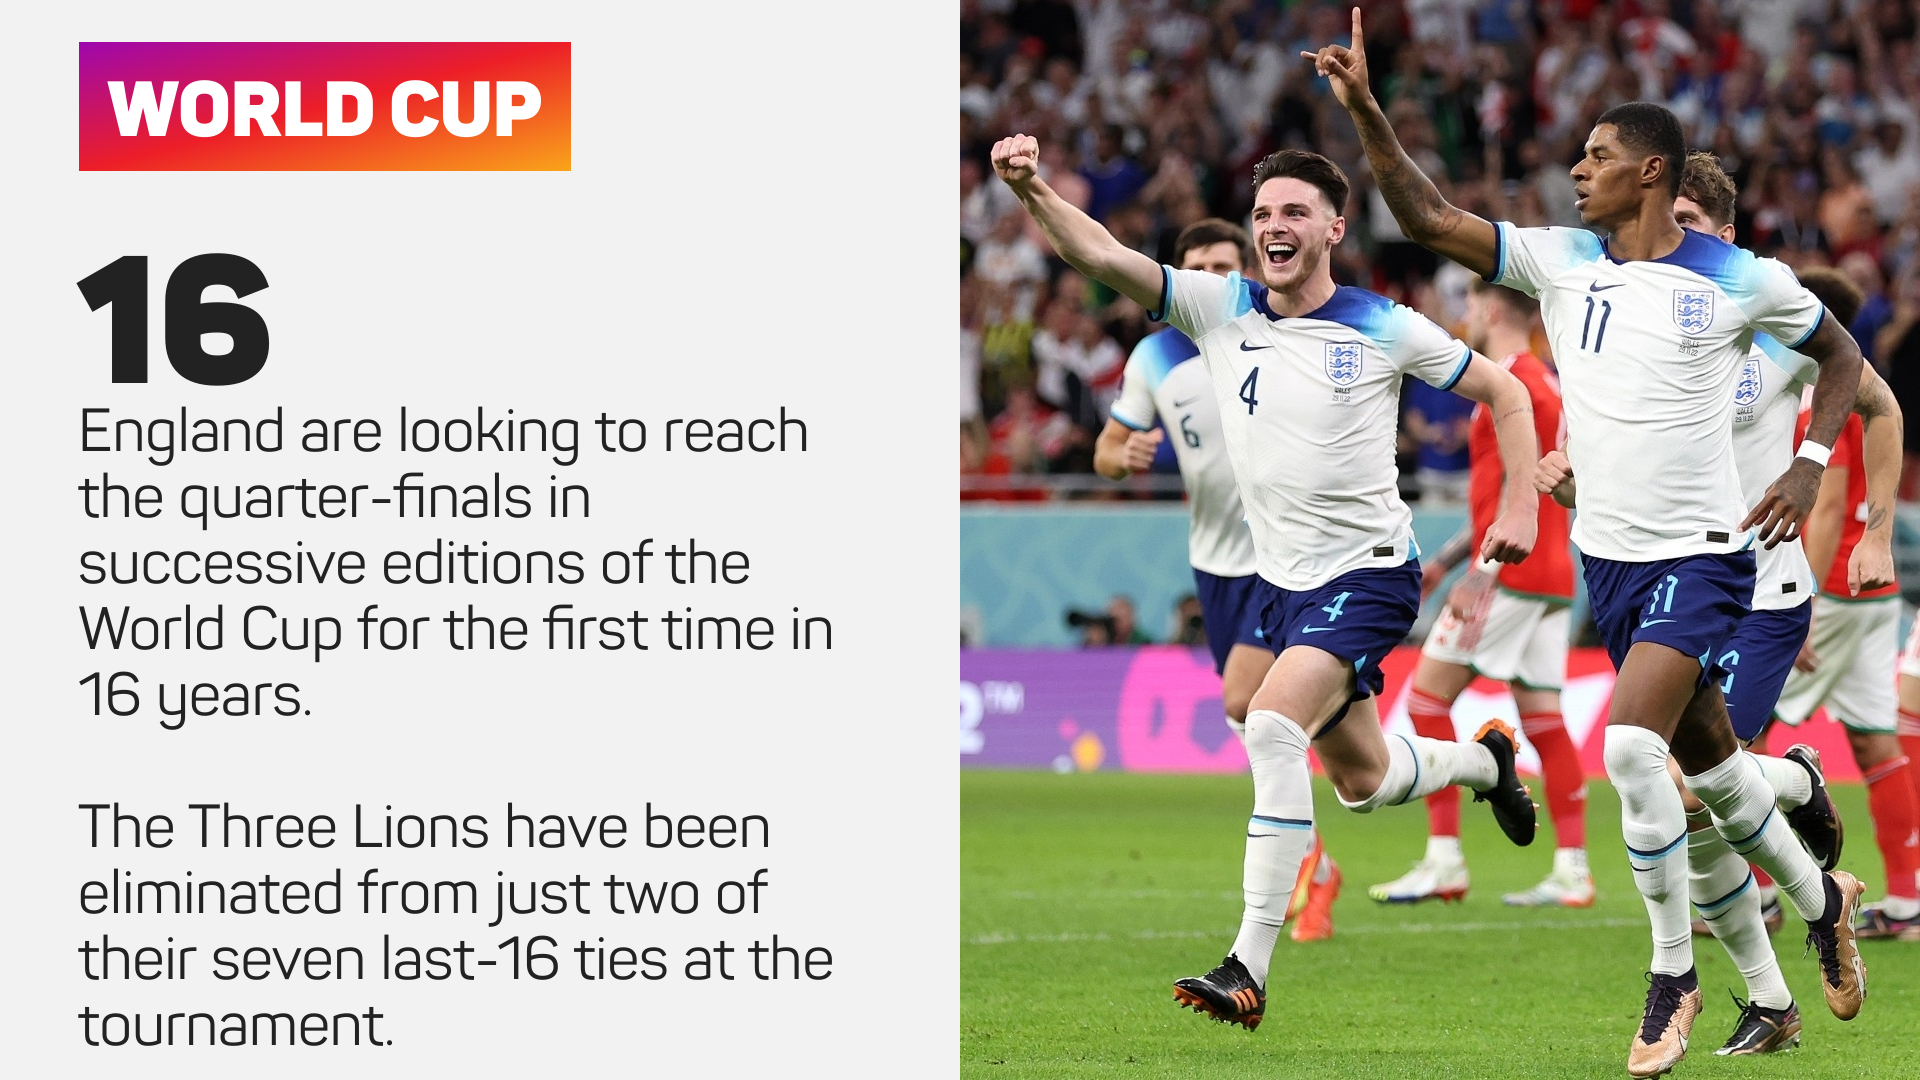 England have not reached successive World Cup quarter-finals in 16 years